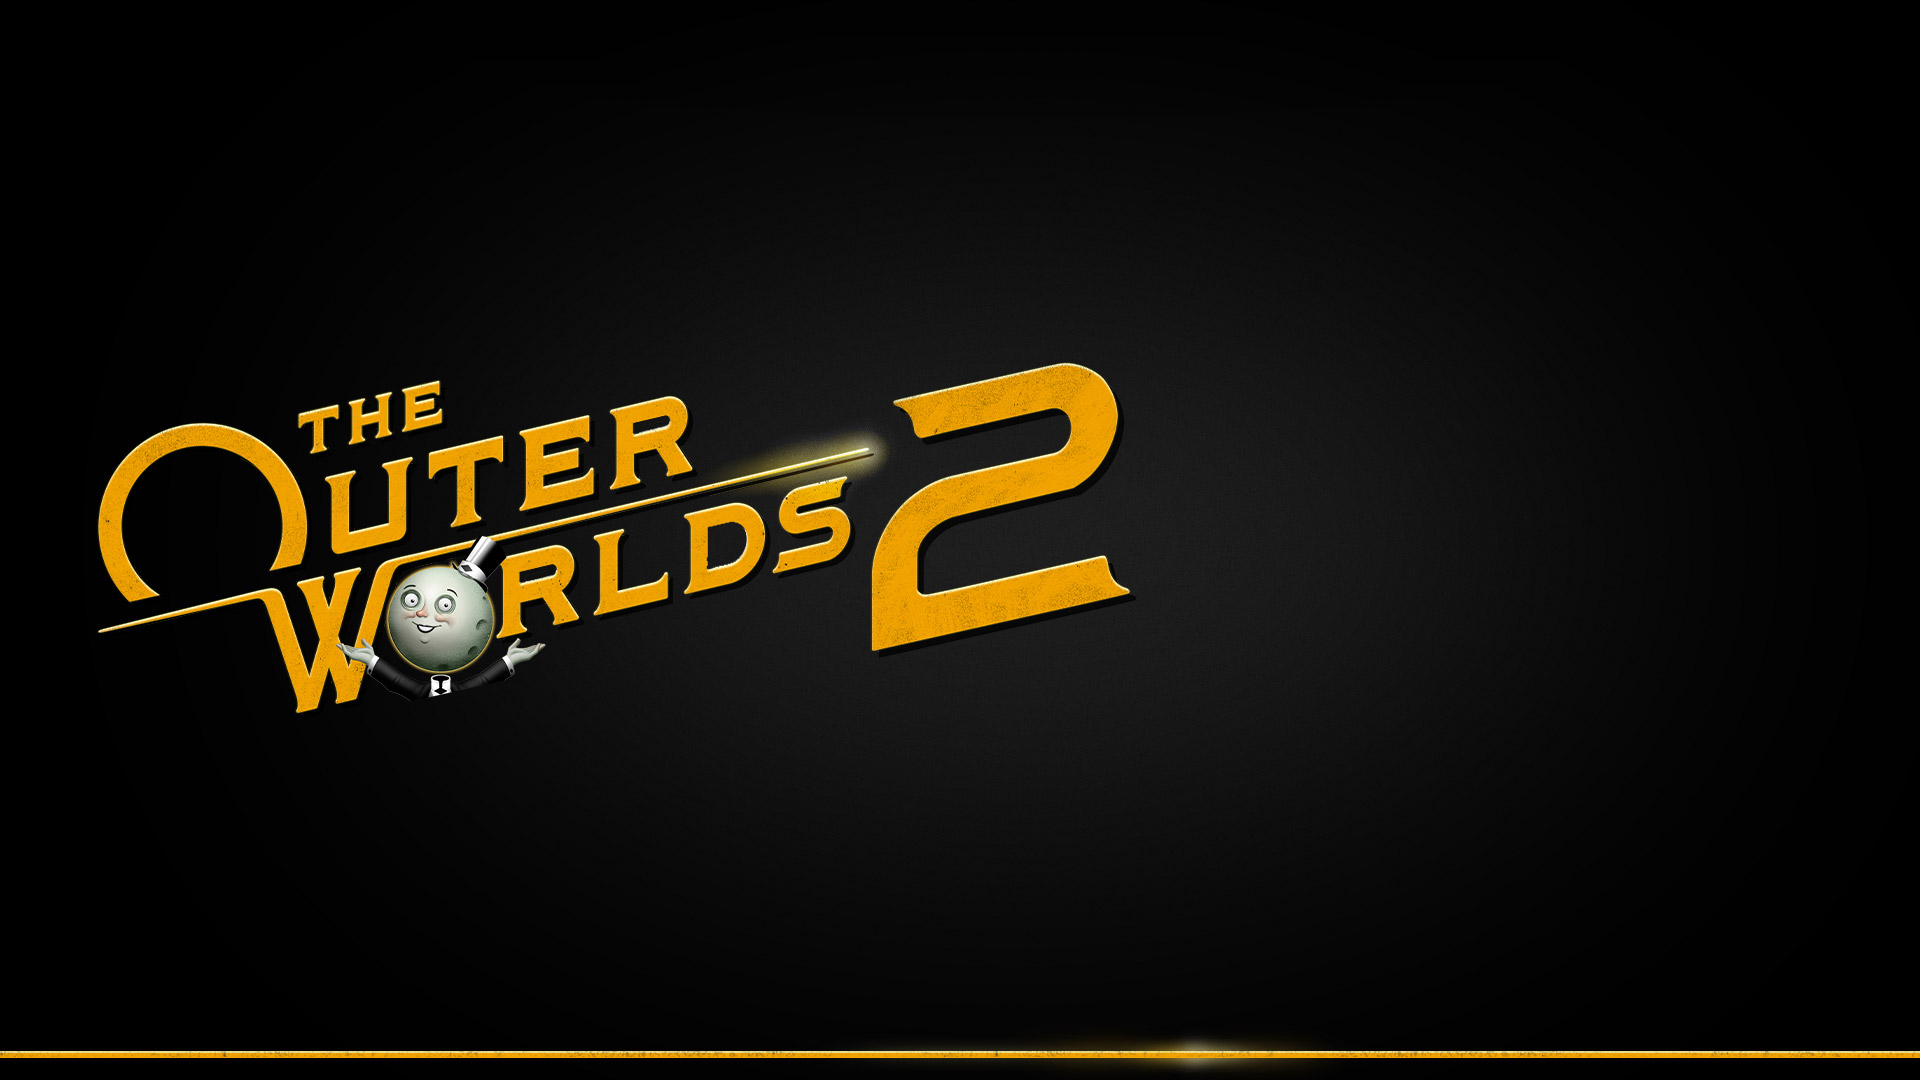 The Outer Worlds 2 logo